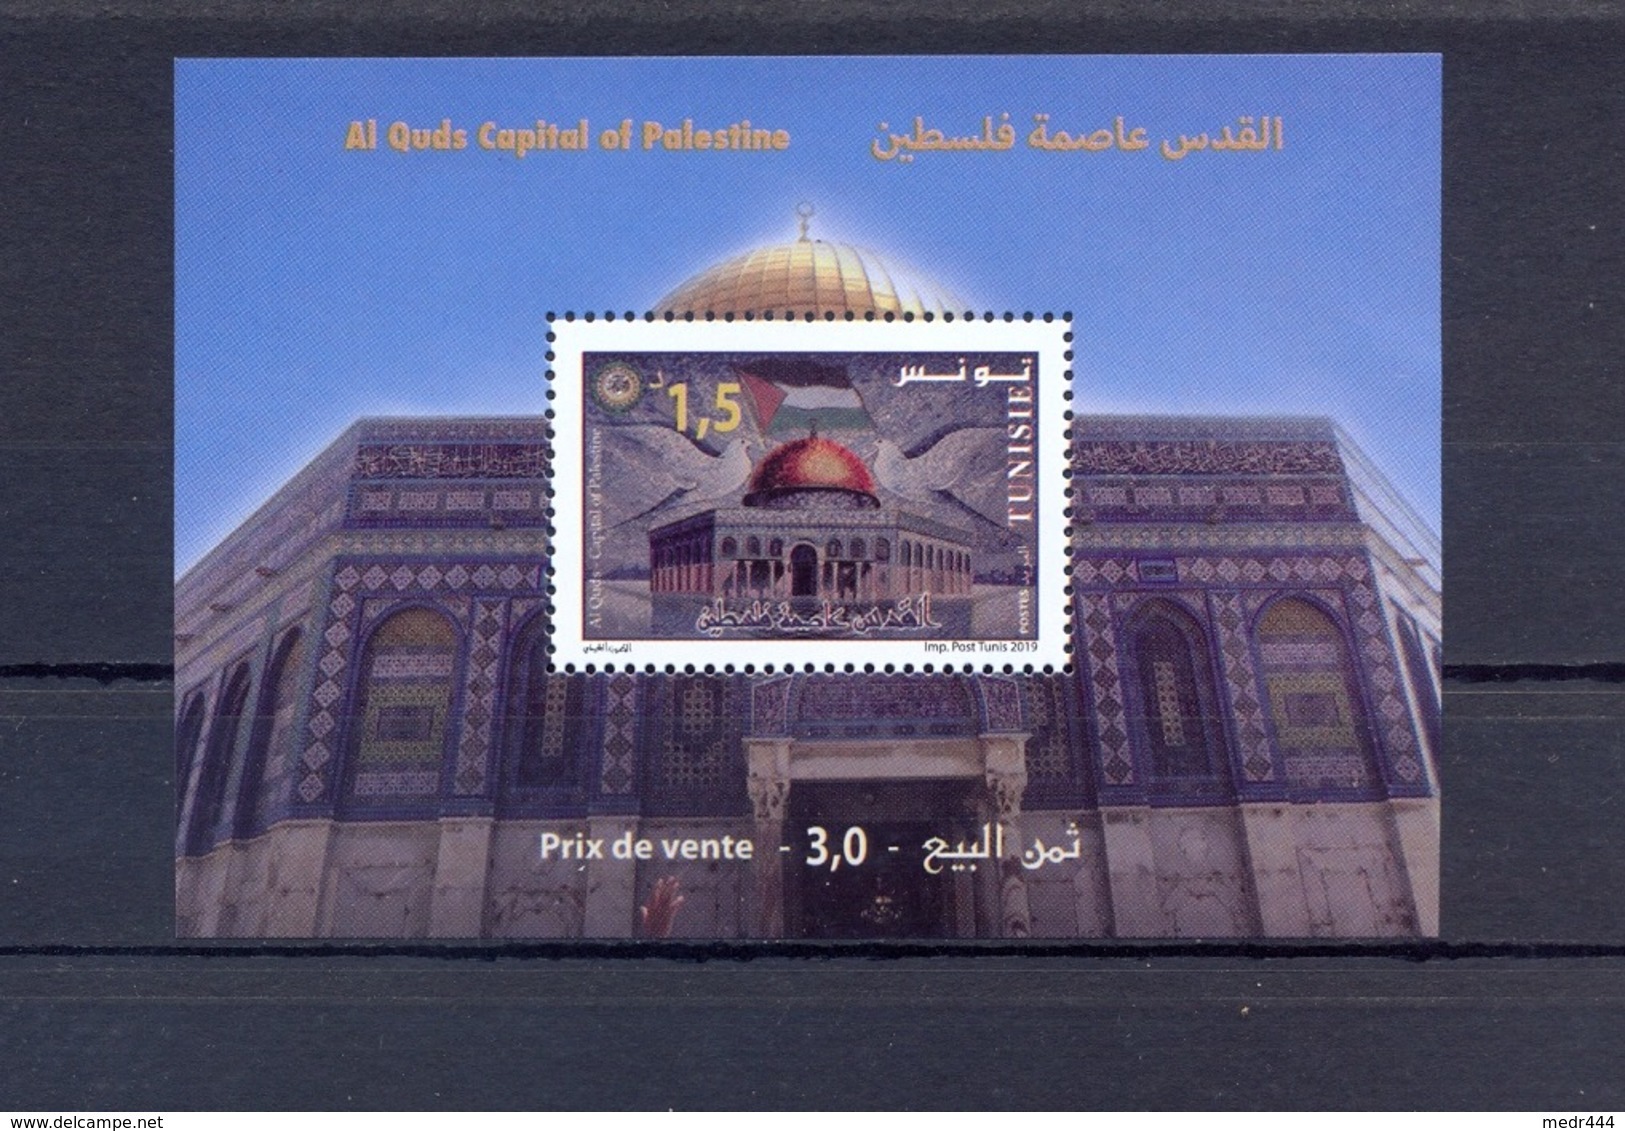 Tunisia/Tunisie 2019 - Minisheet - Al-Quds, Capital Of Palestine - MNH** - Joint Issue - Excellent Quality - Tunisia (1956-...)